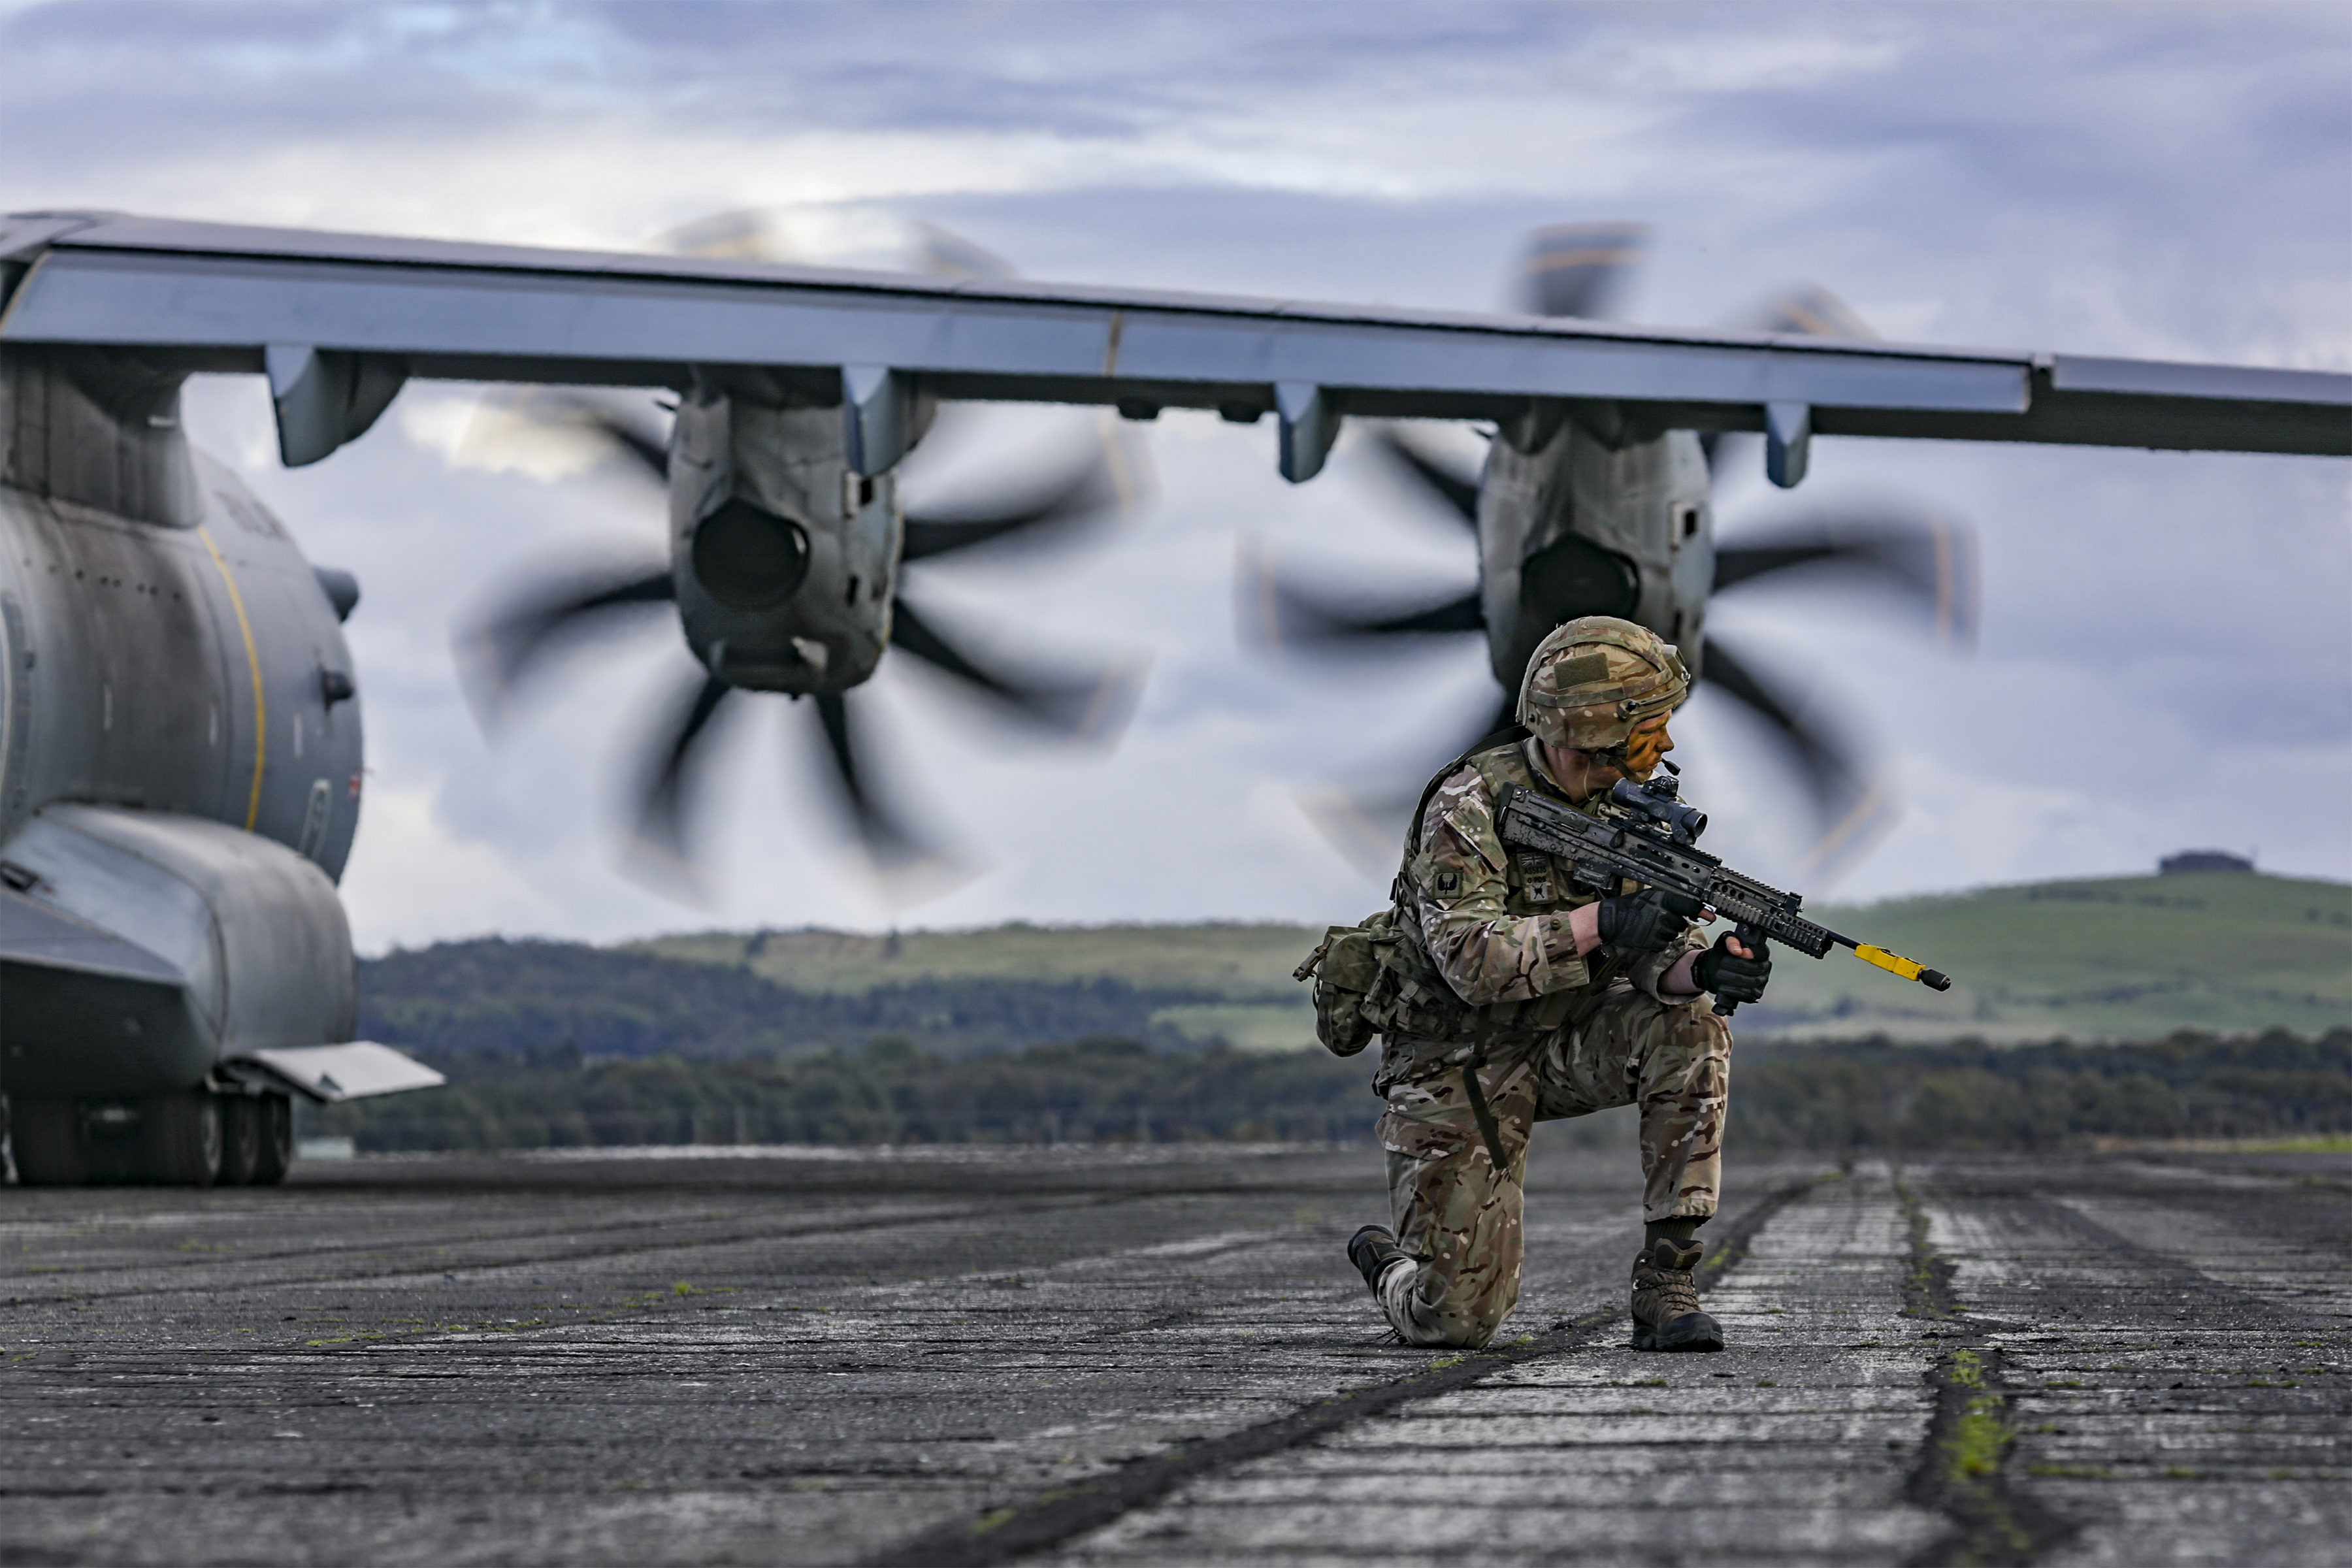 Pictured RAF A400M Atlas Aircraft - Royal Air Force aircraft and personnel will deploy to Stornoway in the Outer Hebrides this week in a major exercise to develop the future Agile Combat Employment (ACE) concept.